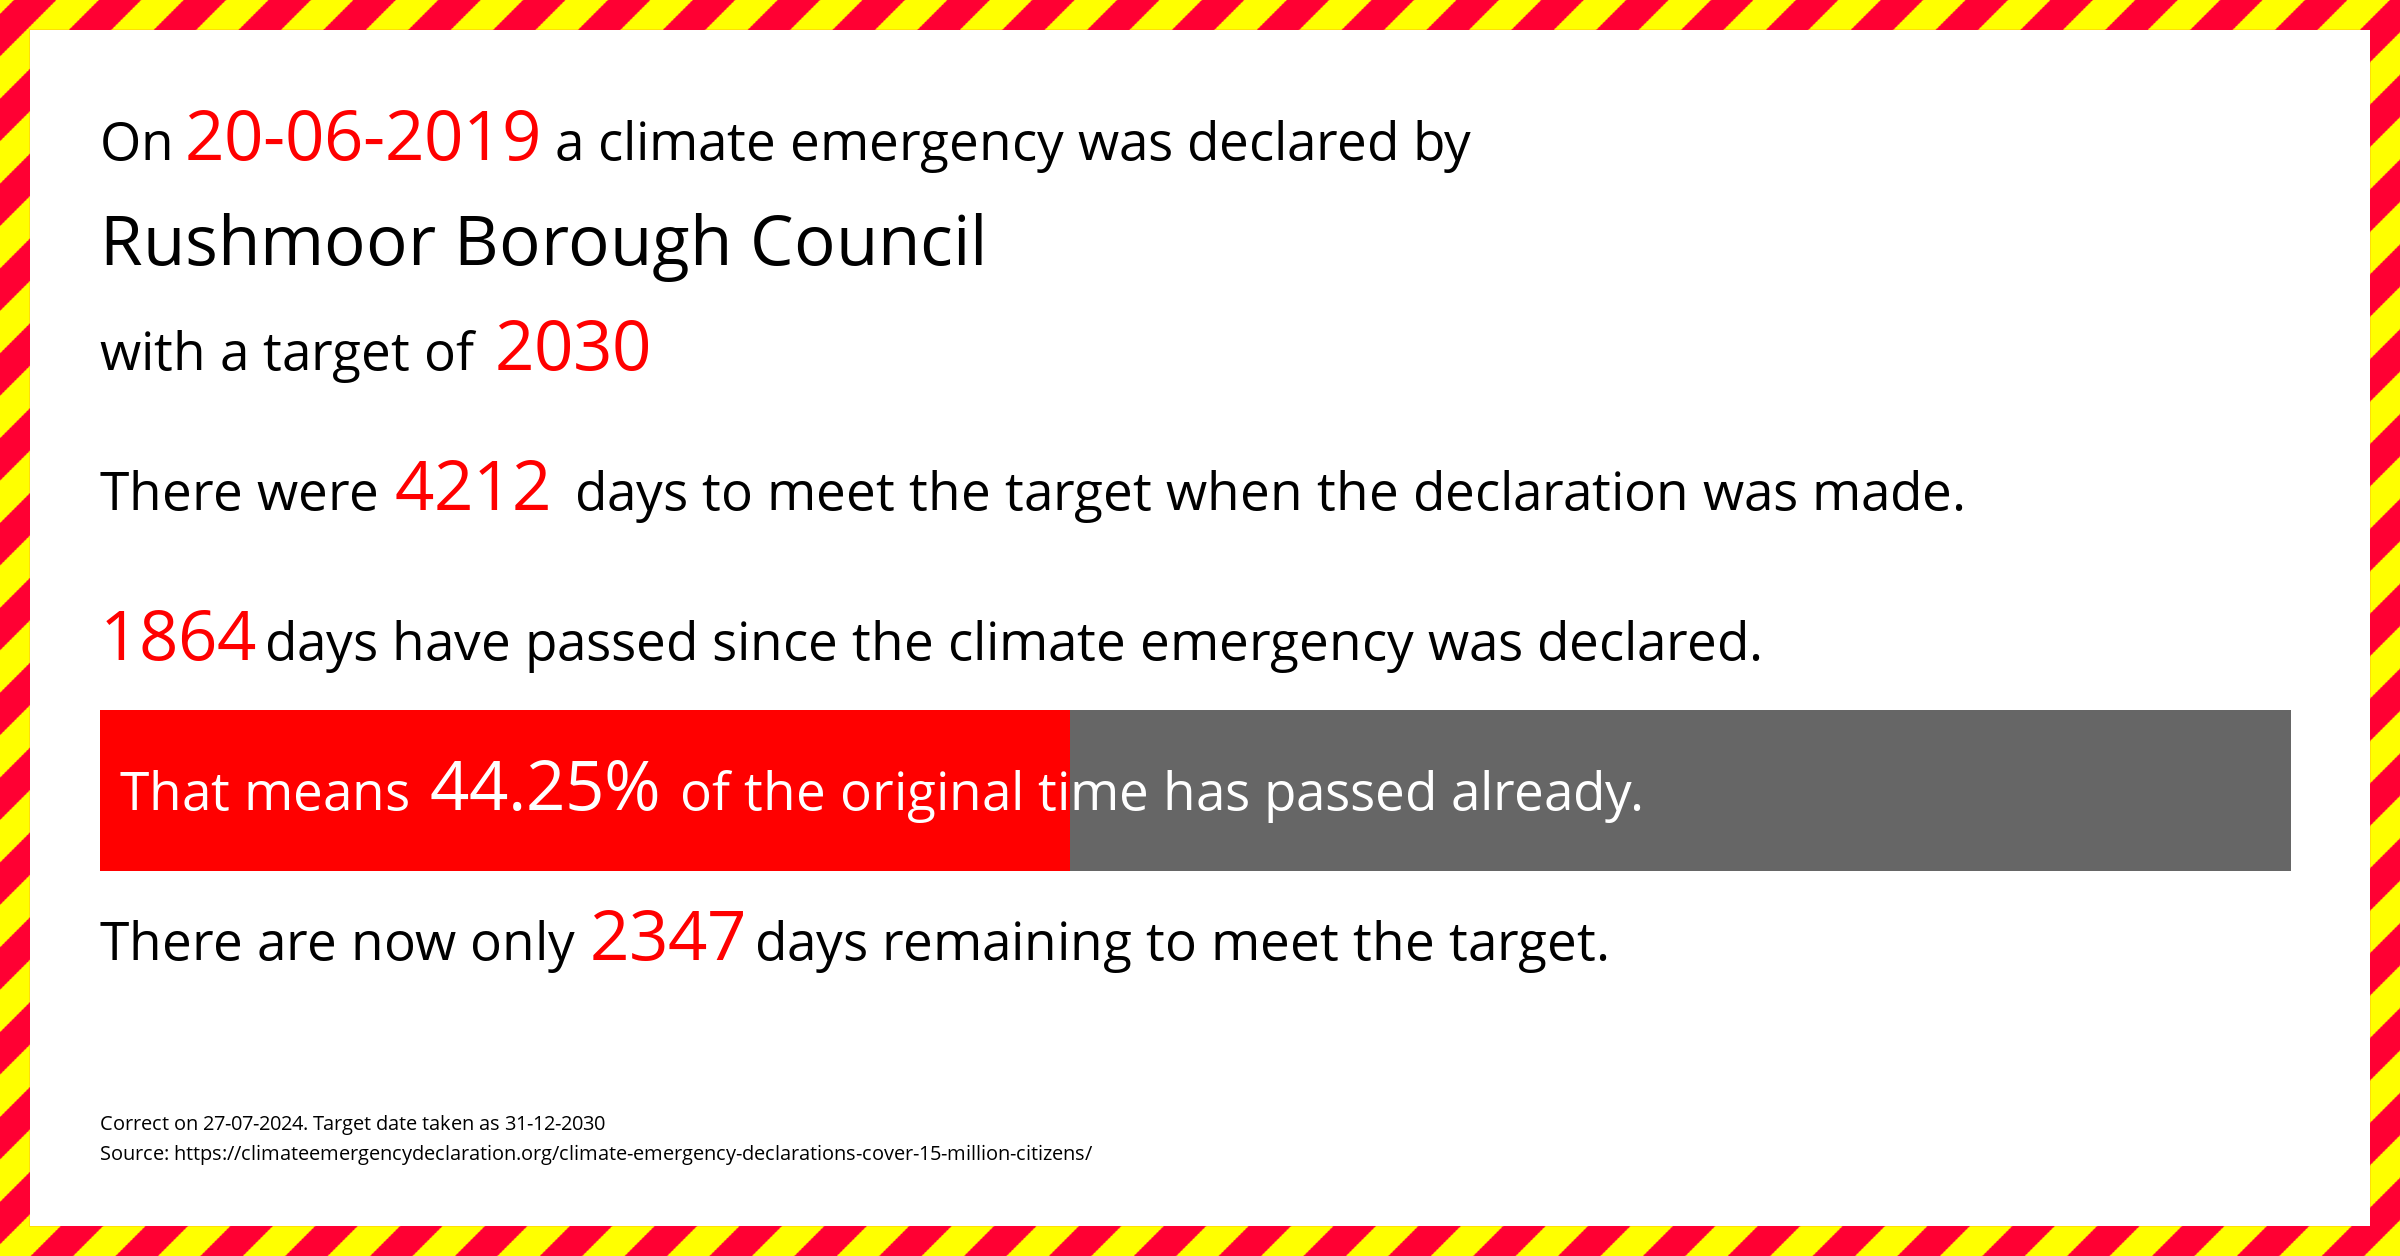 Rushmoor Borough Council declared a Climate emergency on Thursday 20th June 2019, with a target of 2030.